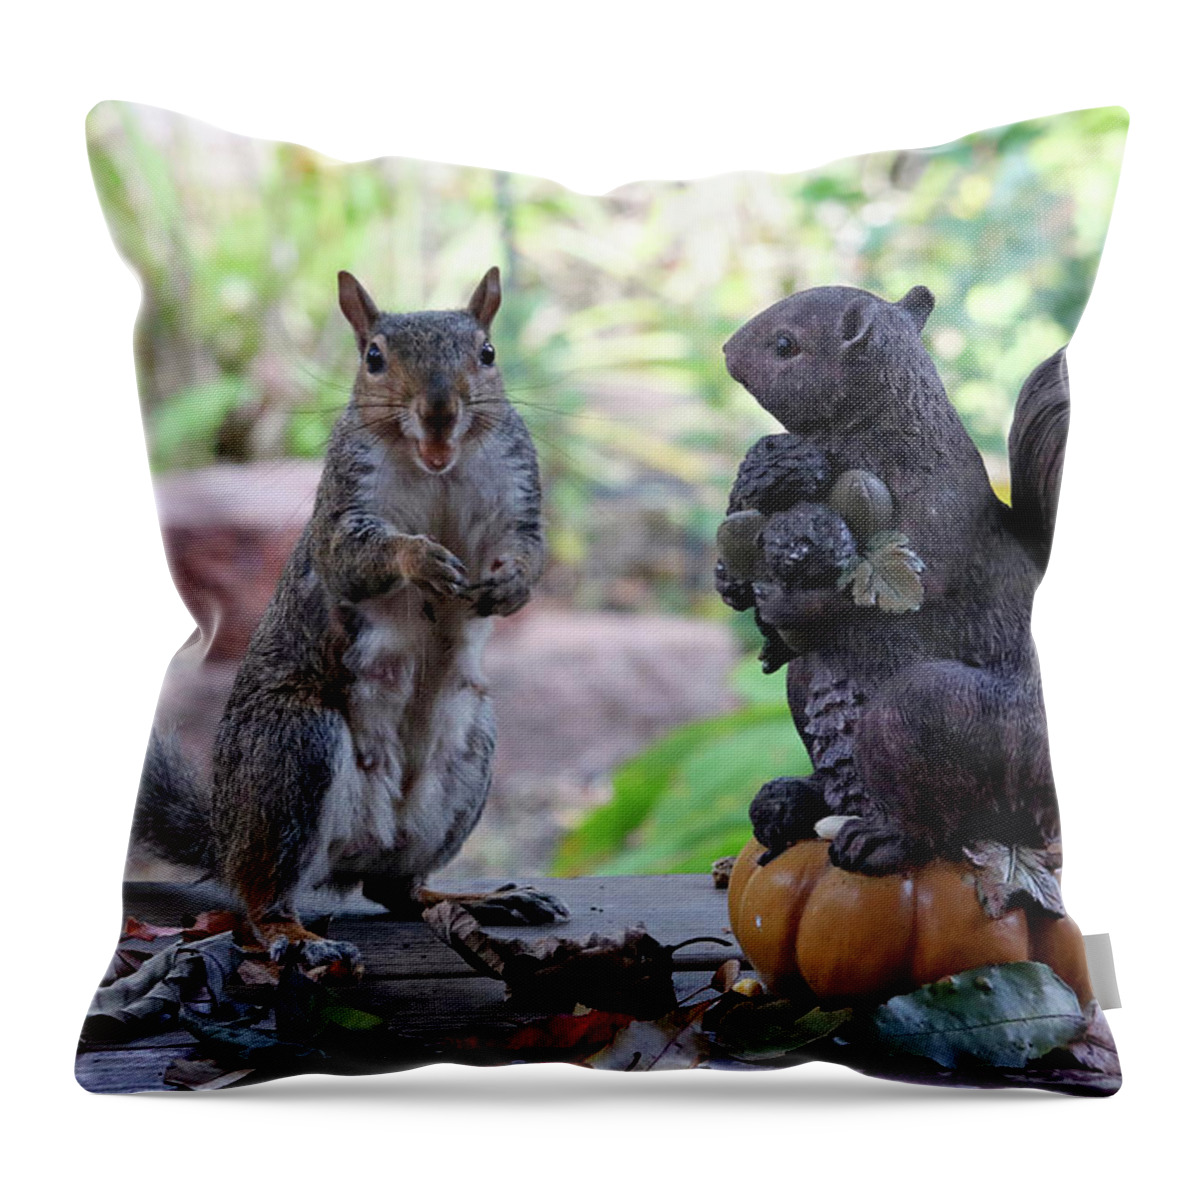 Squirrels Throw Pillow featuring the photograph More Nuts Please by Trina Ansel